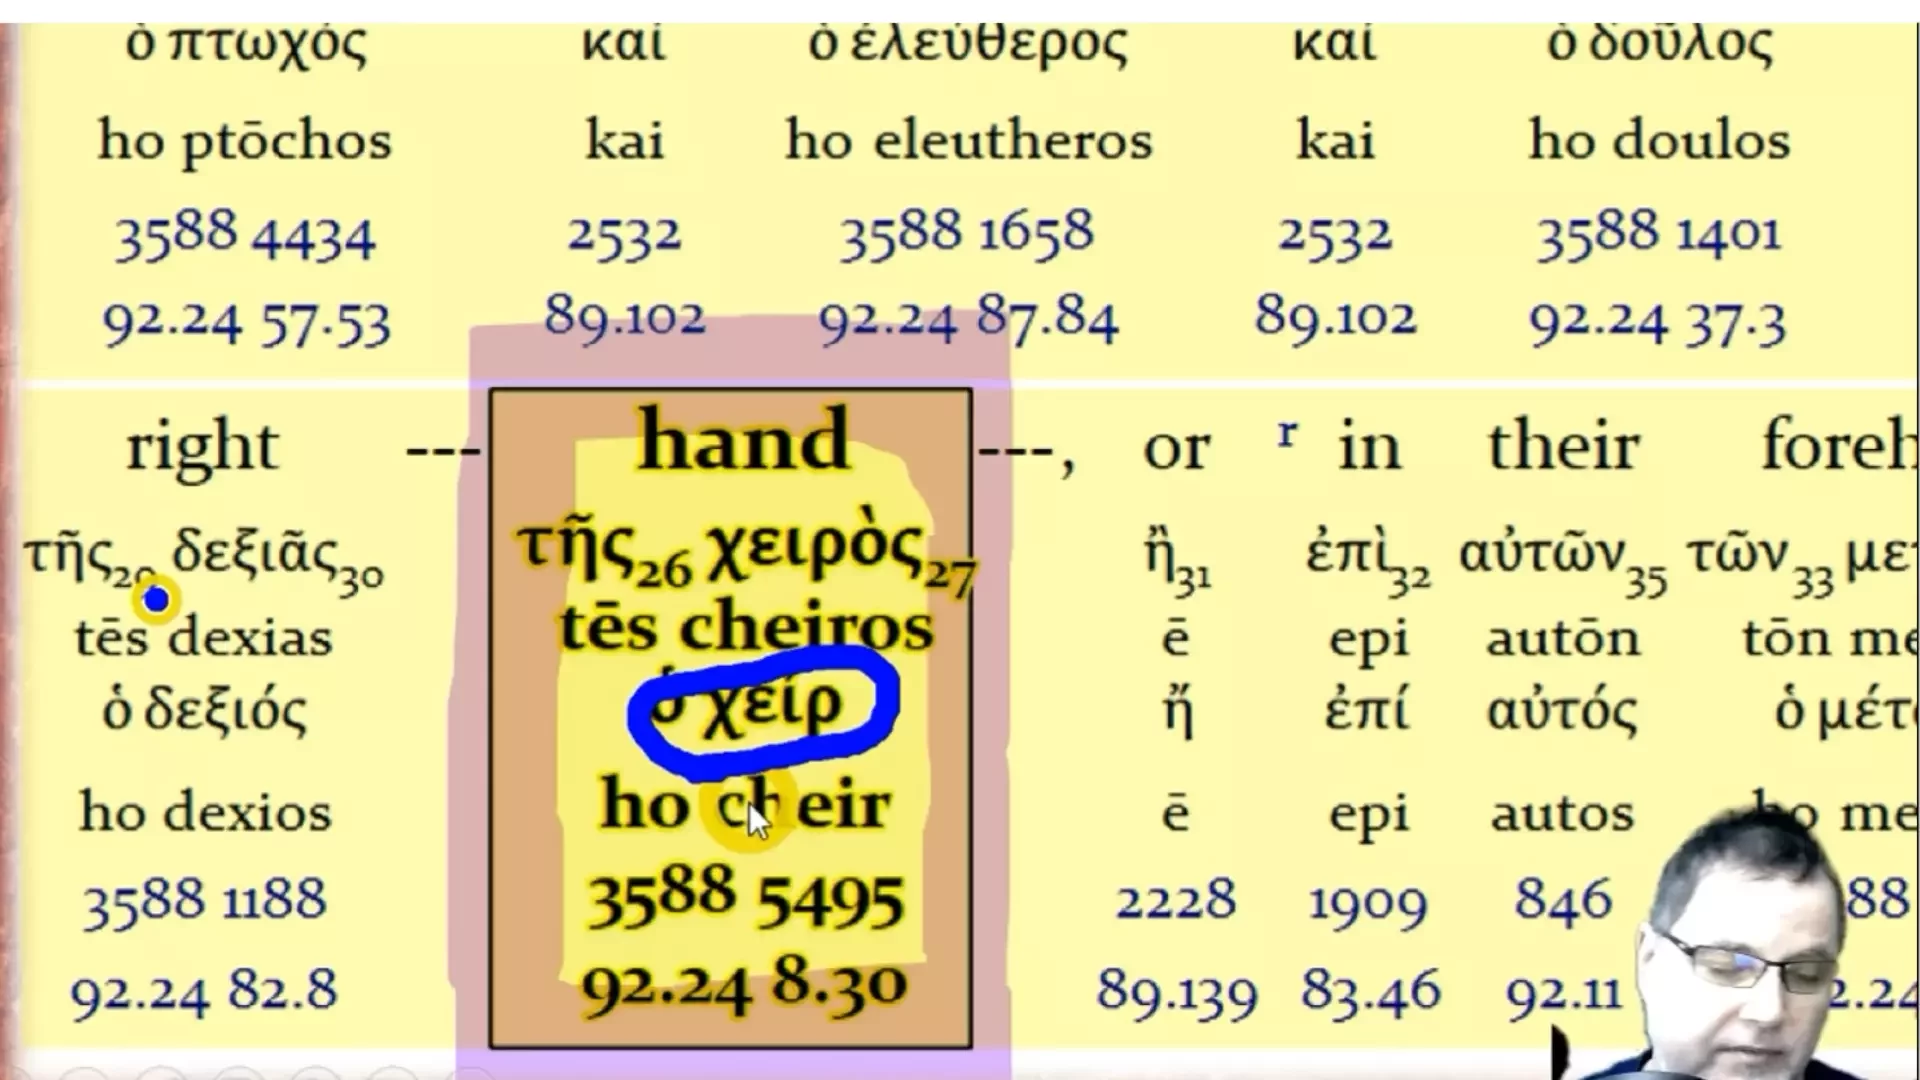 HAND IN REVELATION MEANS ARM